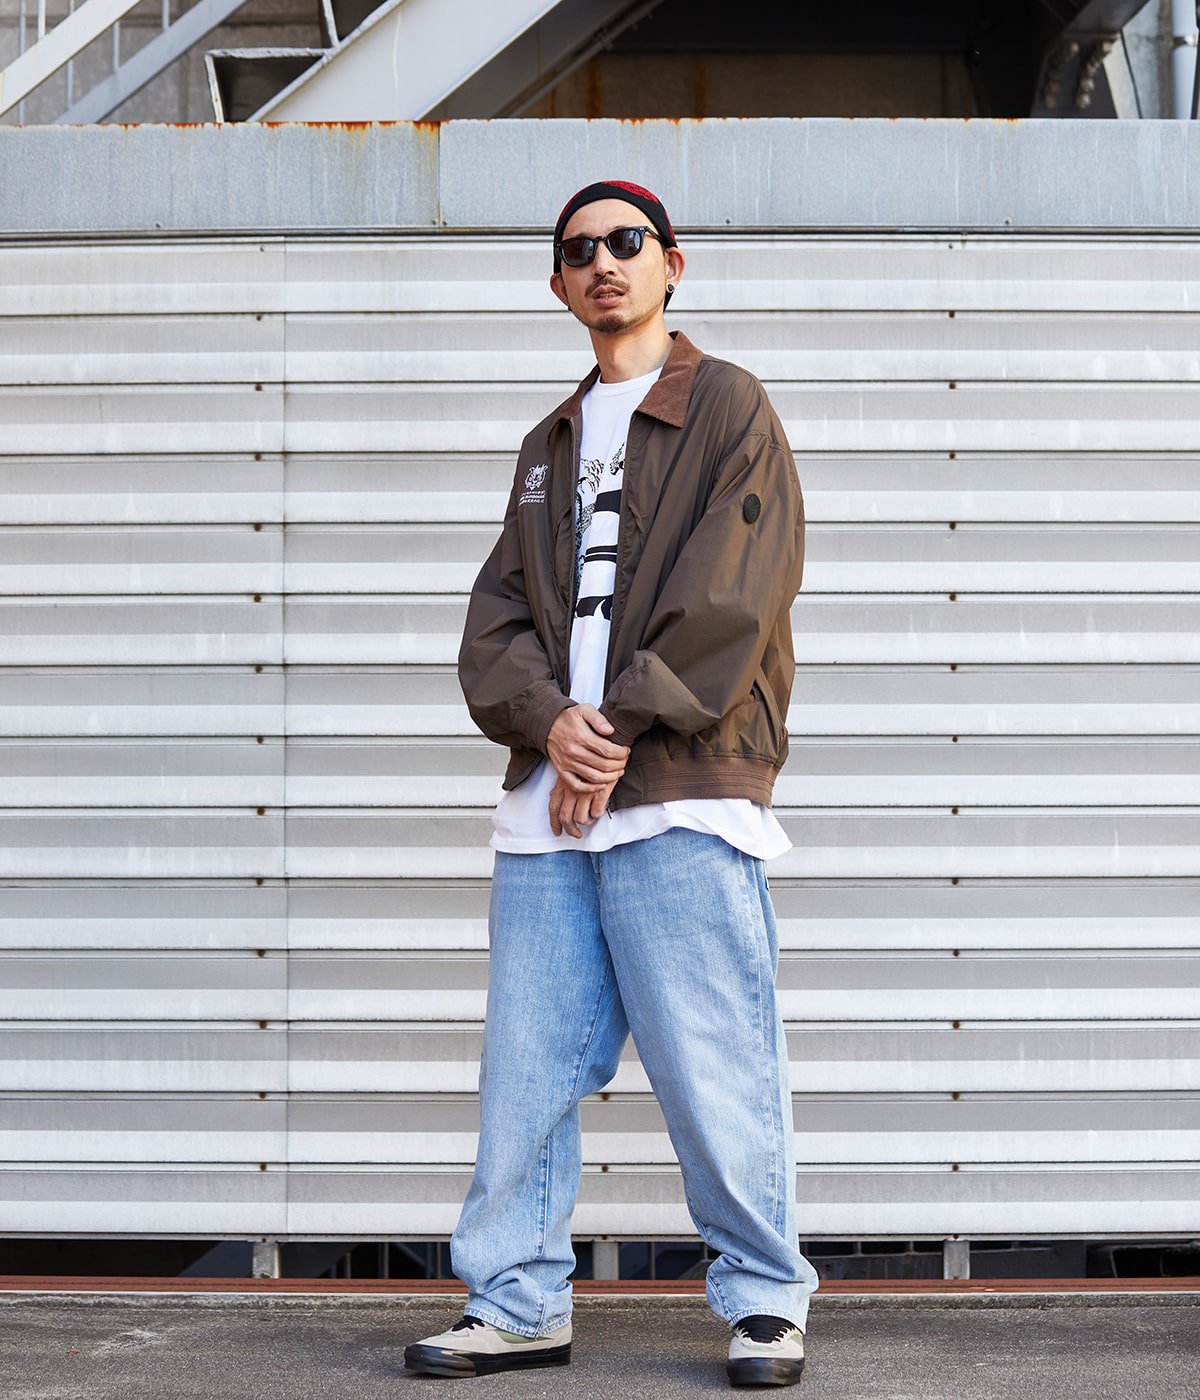 ONLY ARK】Exclusive 568 STAY LOOSE VARSITY ACADEMIA LTWT C - used 